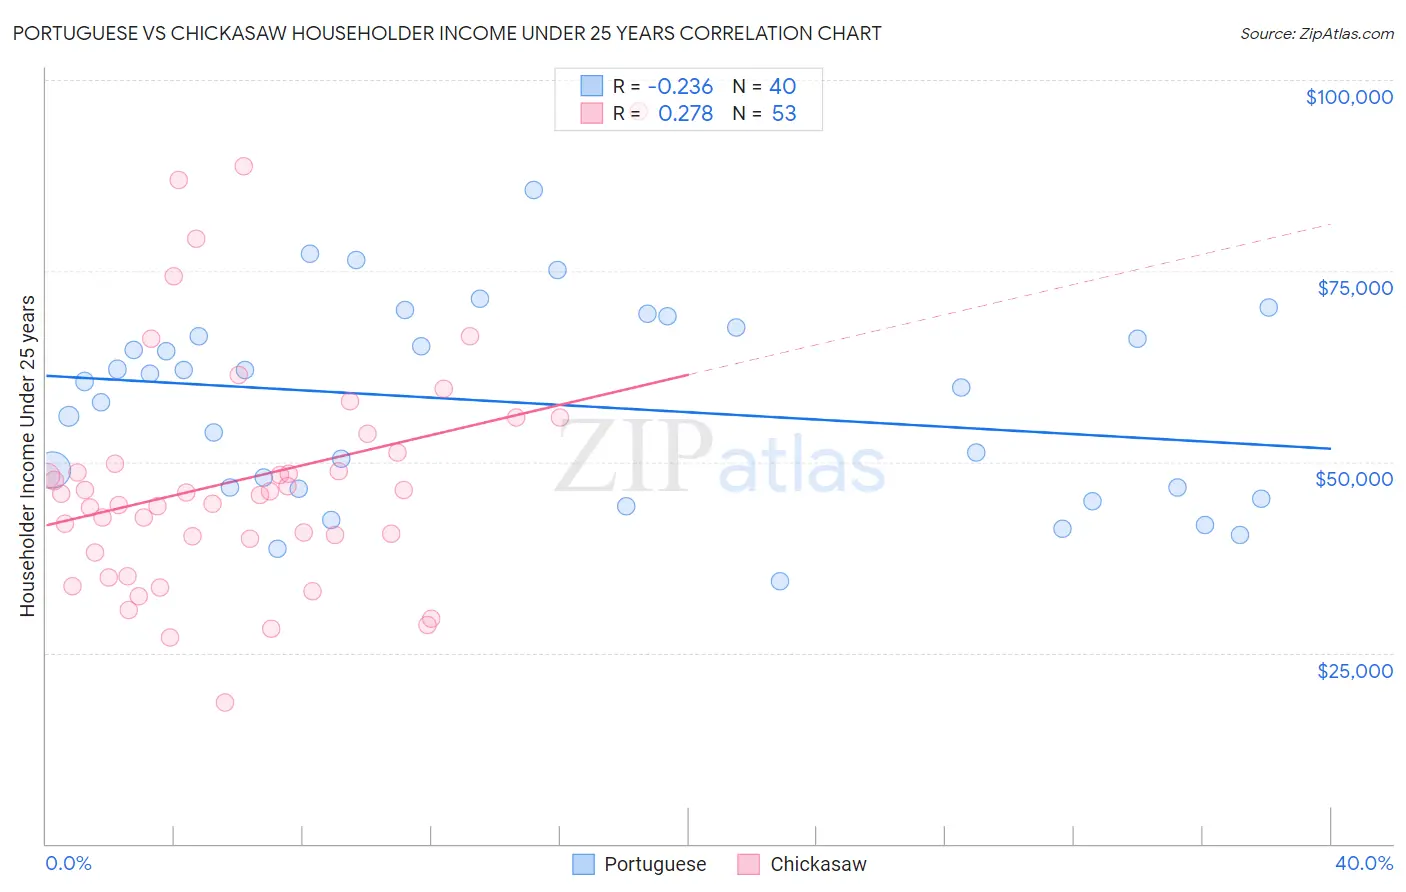 Portuguese vs Chickasaw Householder Income Under 25 years